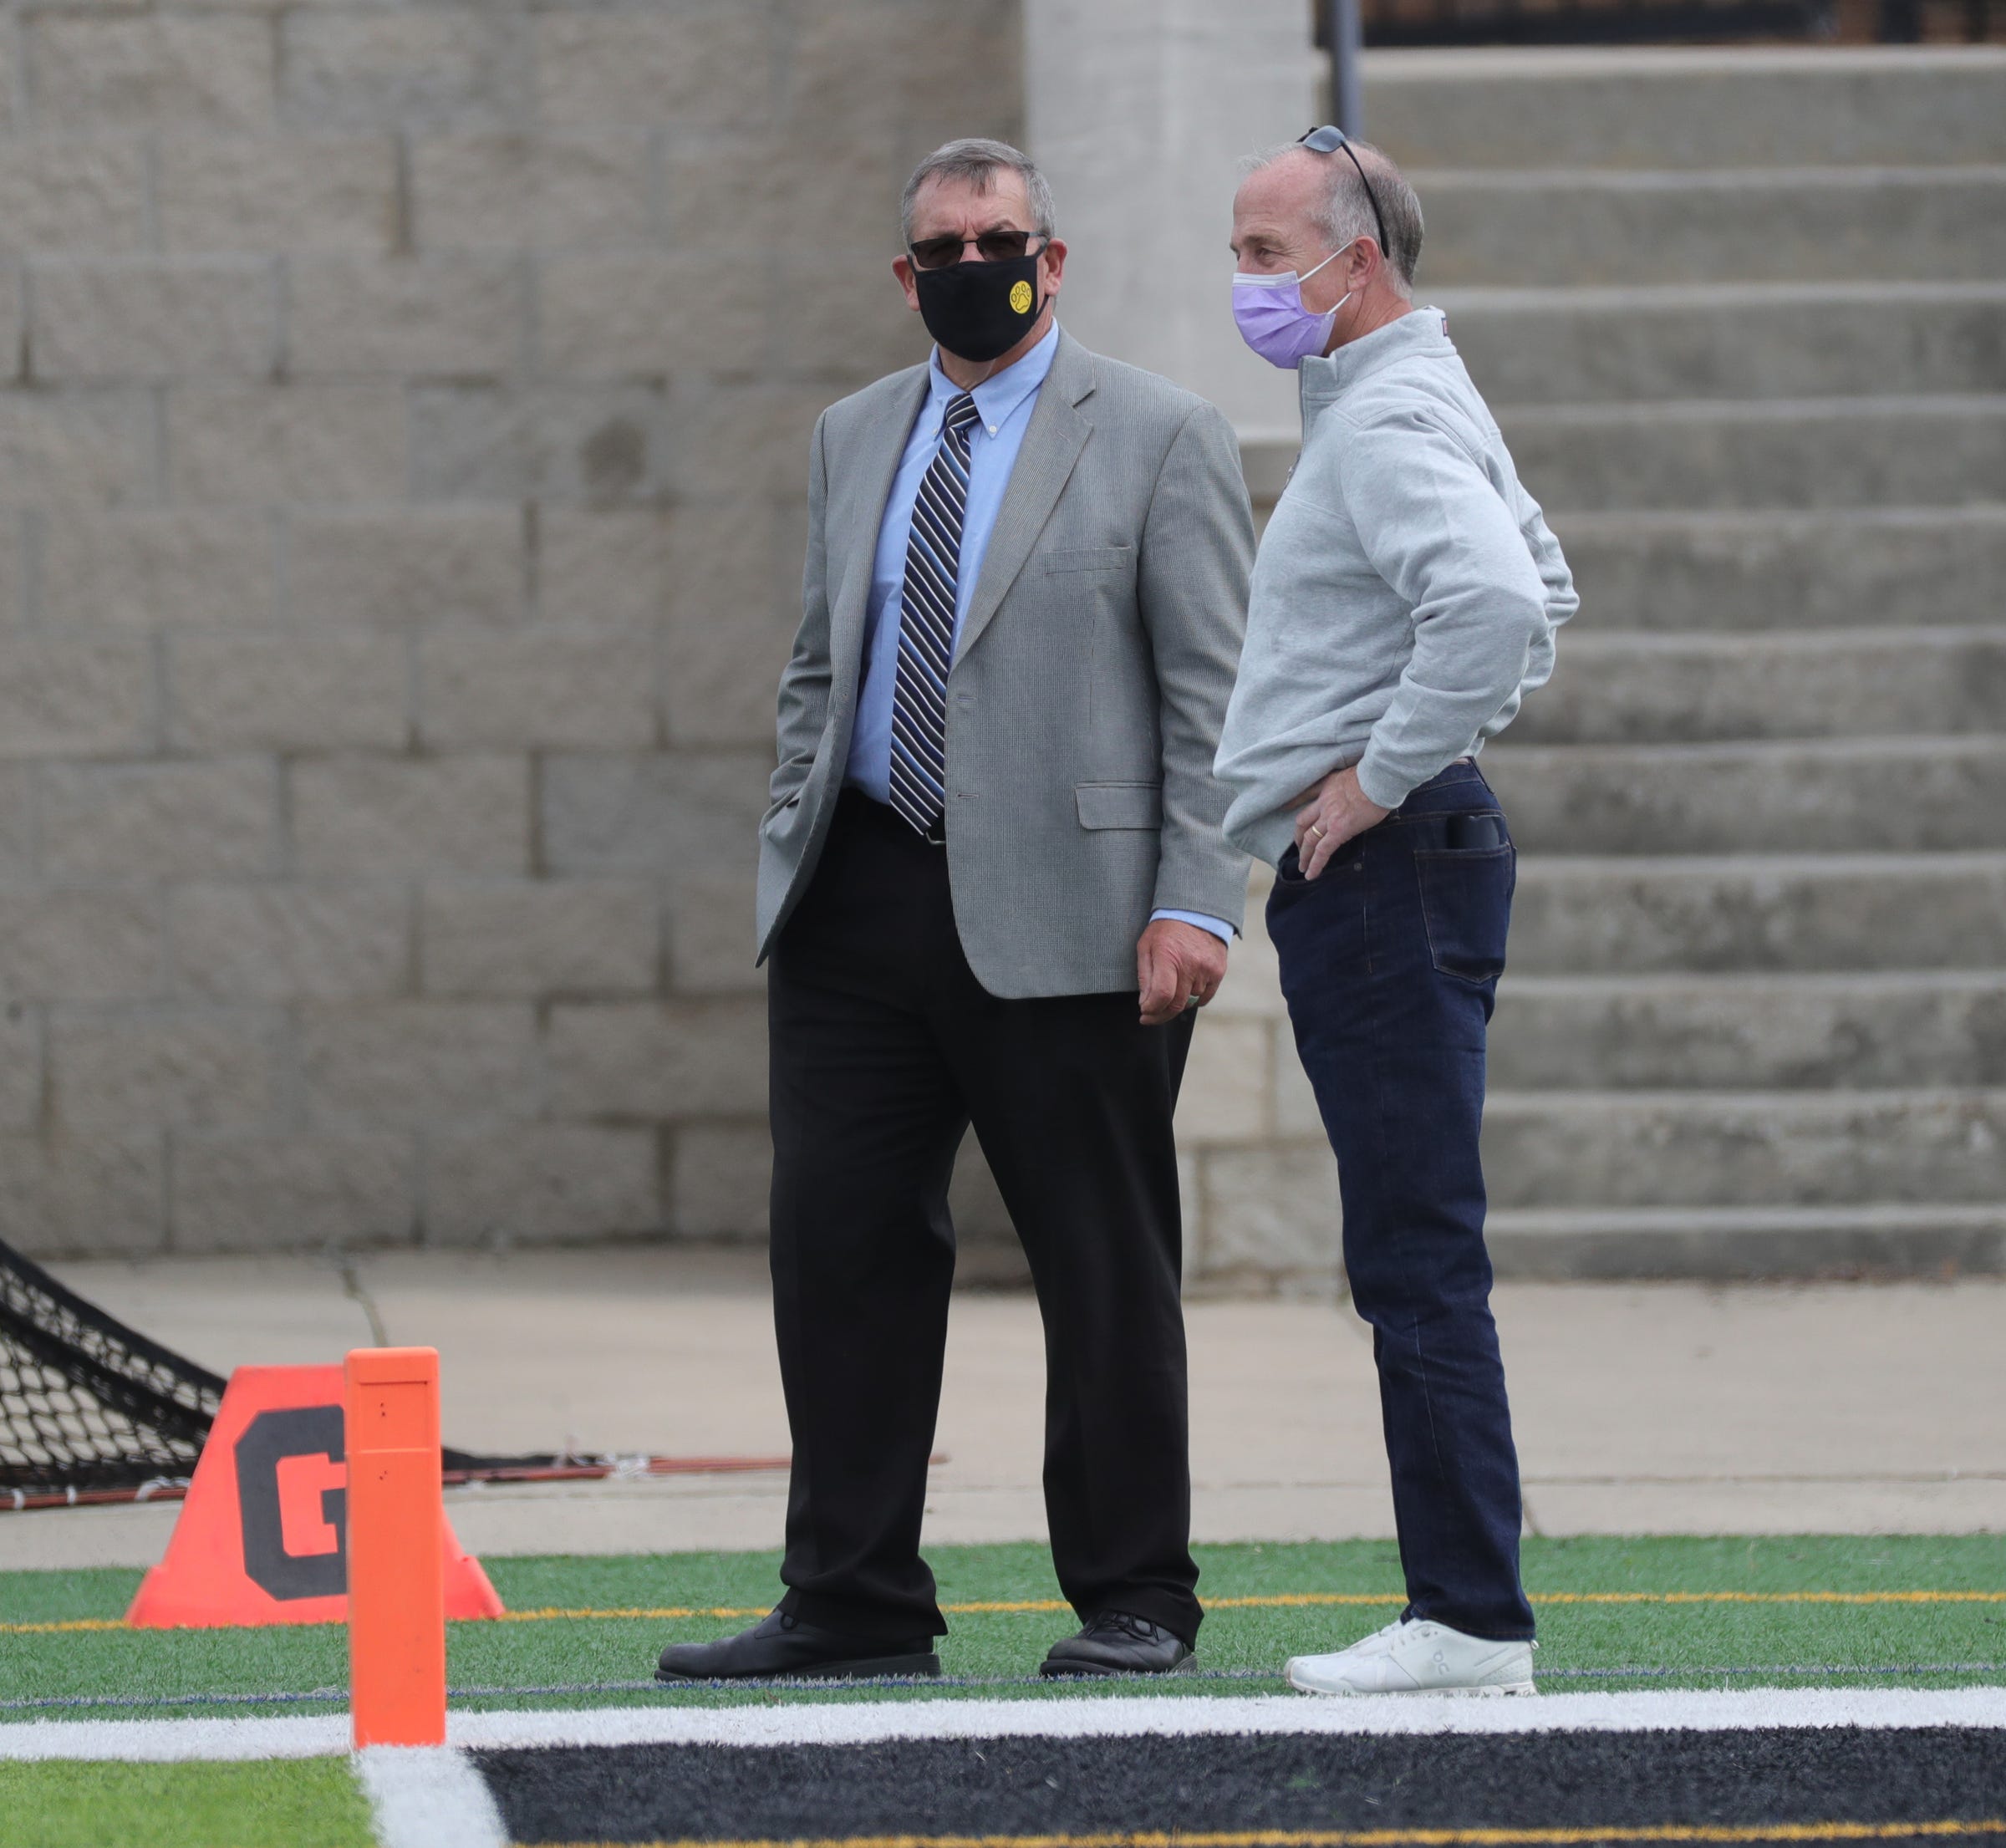 Adrian College Athletic Director Michael Duffy and school President Jeffrey Docking on the field during action against Trine University on October 3, 2020, at Docking Stadium in Adrian Michigan.